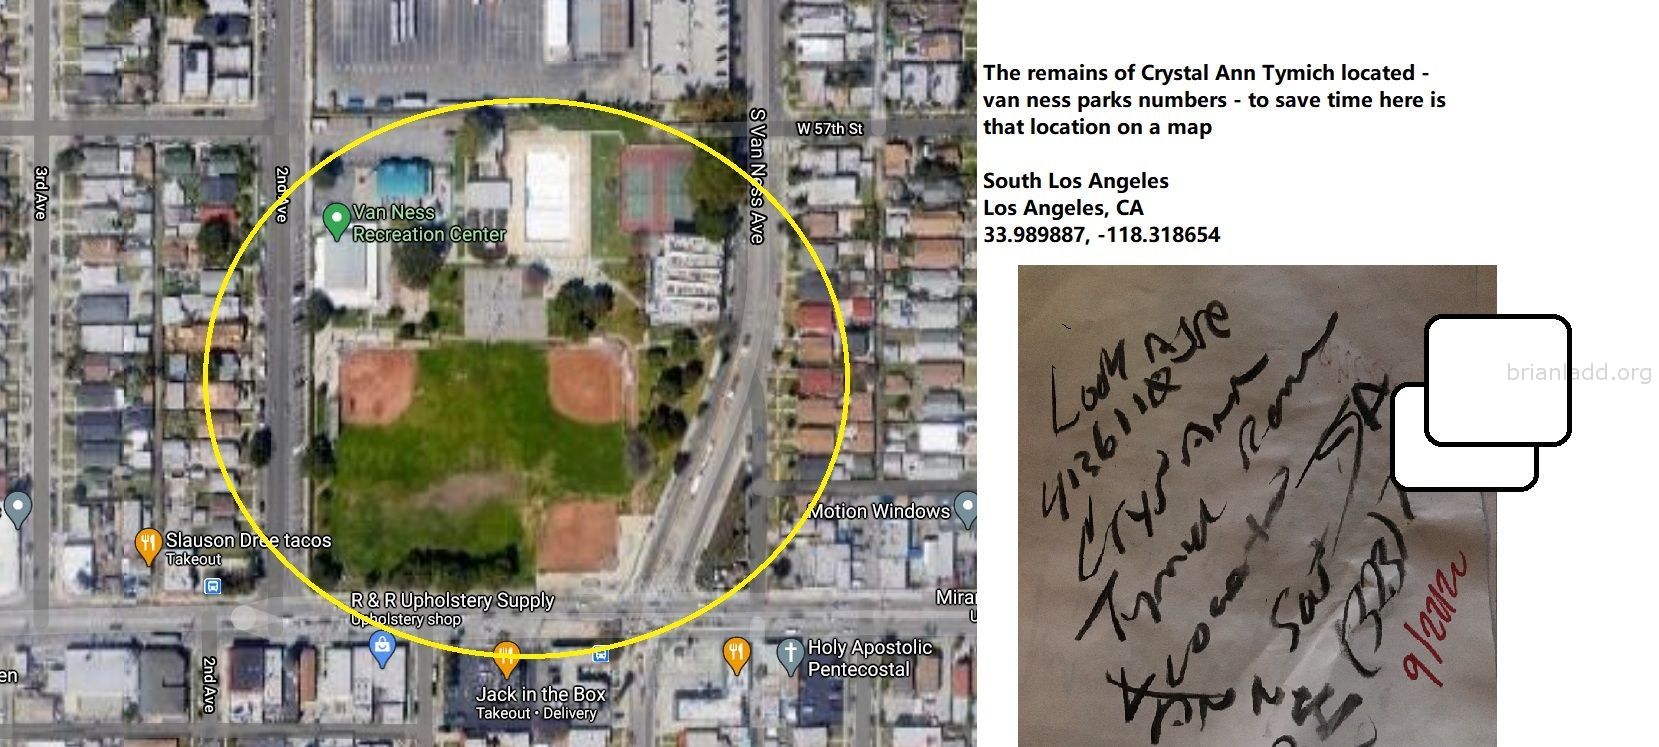 13686 22 September 2020 4 - The Remains Of Crystal Ann Tymich Located - Van Ness Parks Numbers - To Save Time Here Is Th...
The Remains Of Crystal Ann Tymich Located - Van Ness Parks Numbers - To Save Time Here Is That Location On A Map  South Los Angeles  Los Angeles, Ca  33.989887, -118.318654  Case At   https://briansprediction.com/Crystal-Ann-Tymich
